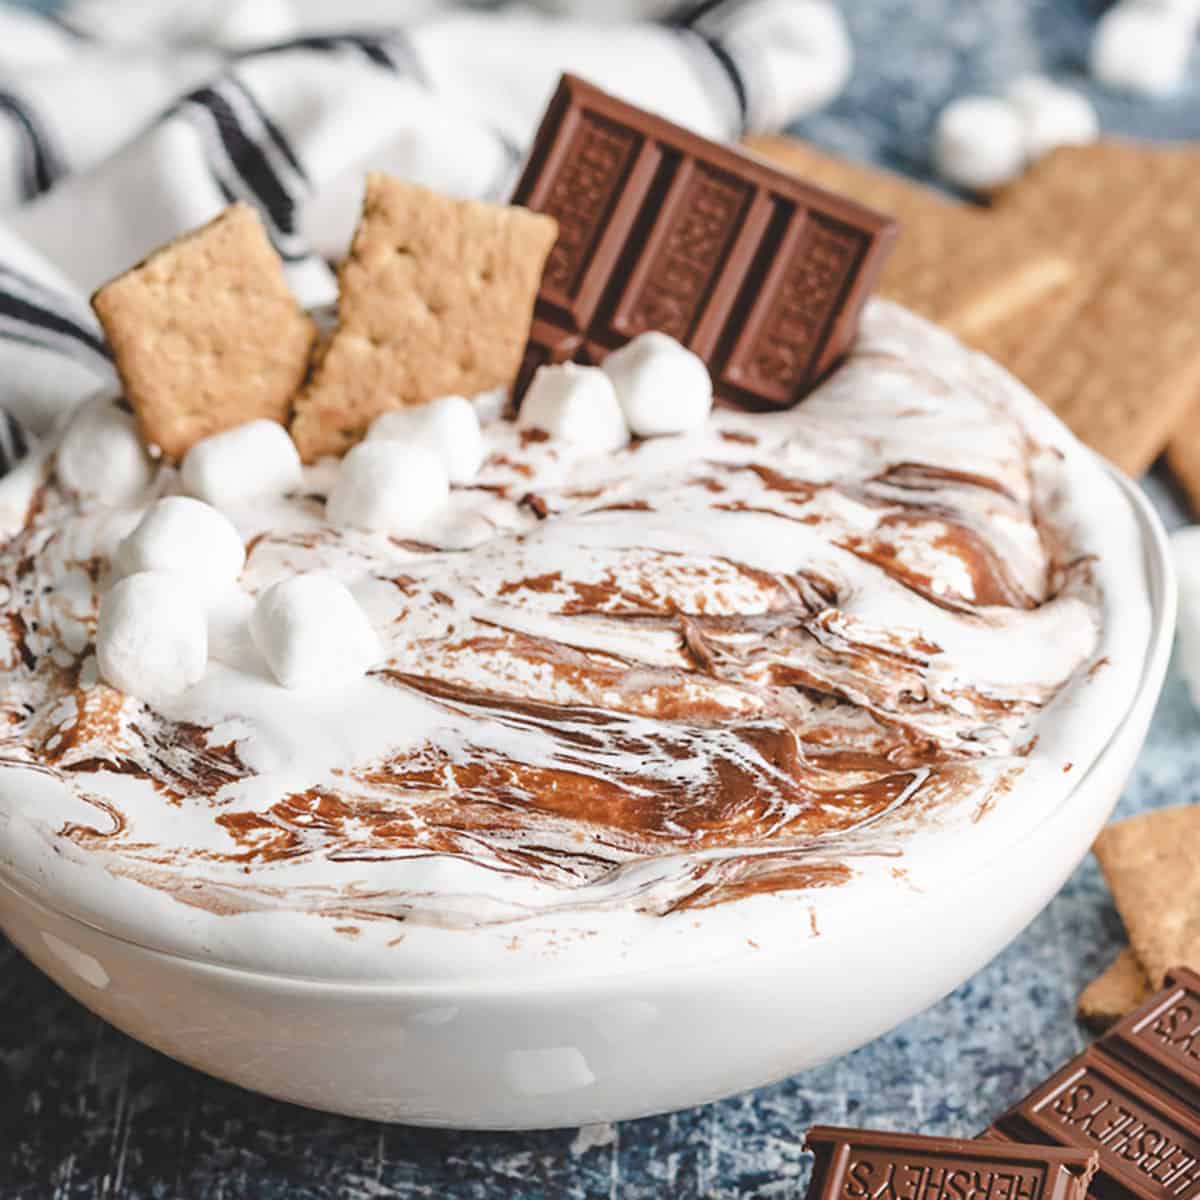 The finished smores dip recipe in a bowl.